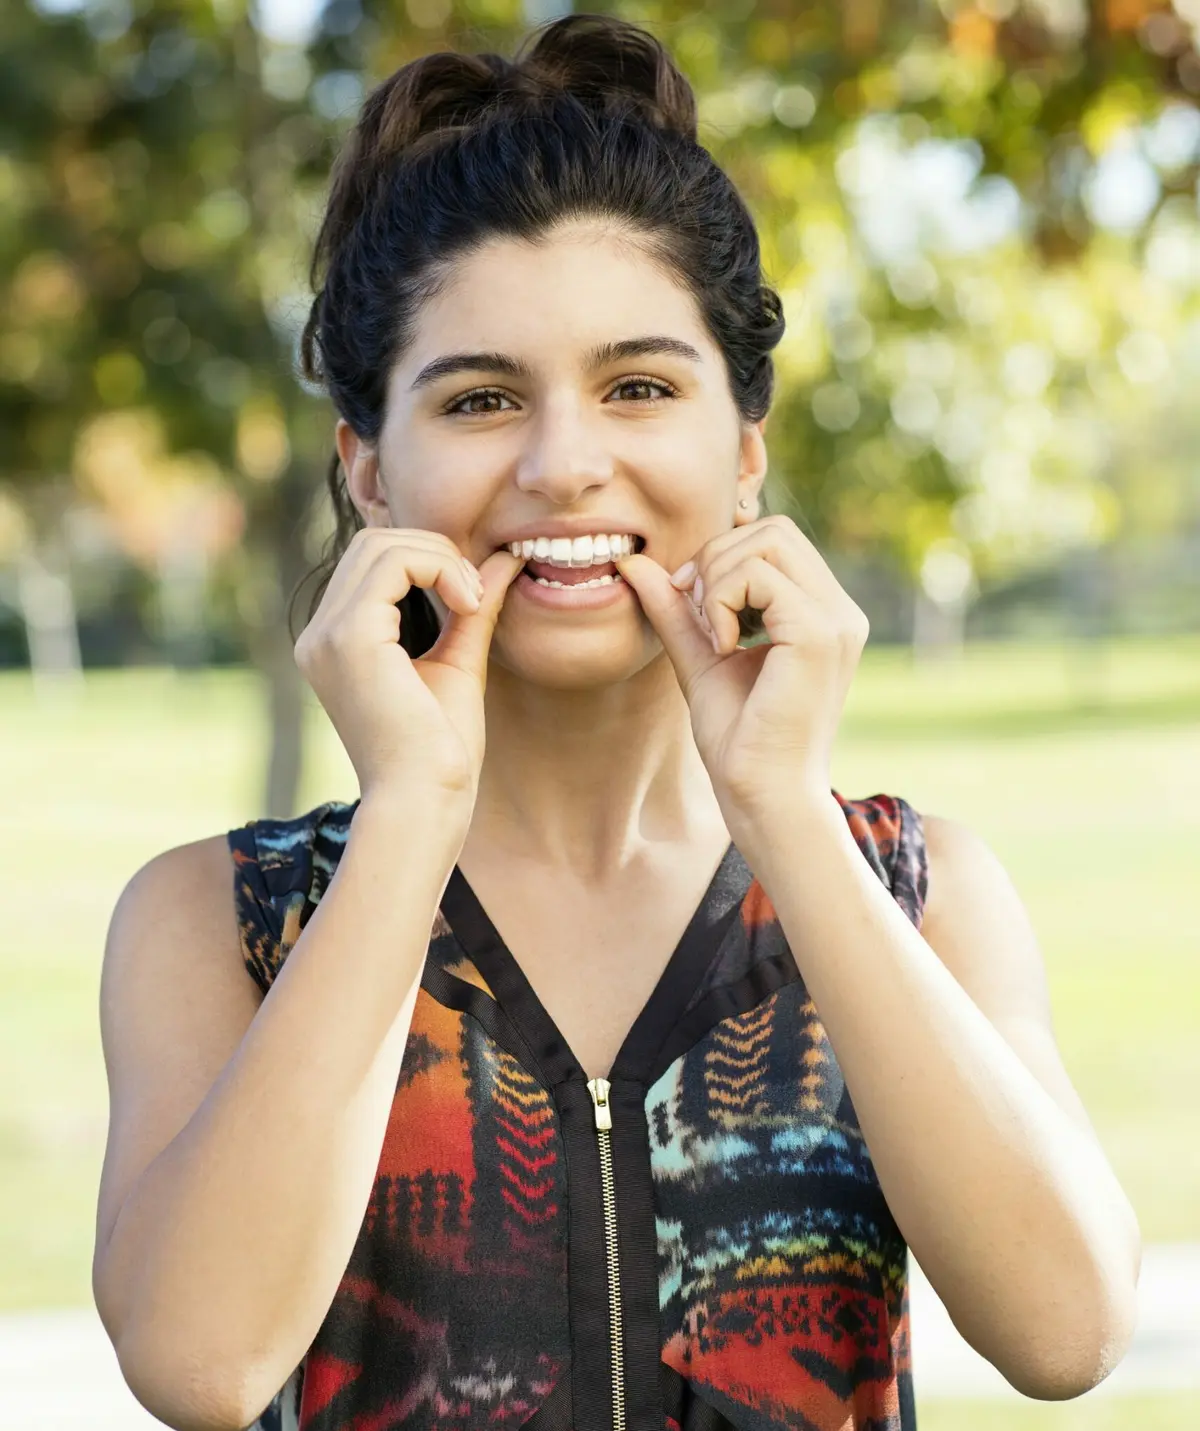 Where Can I Get Invisalign Teen Aligners